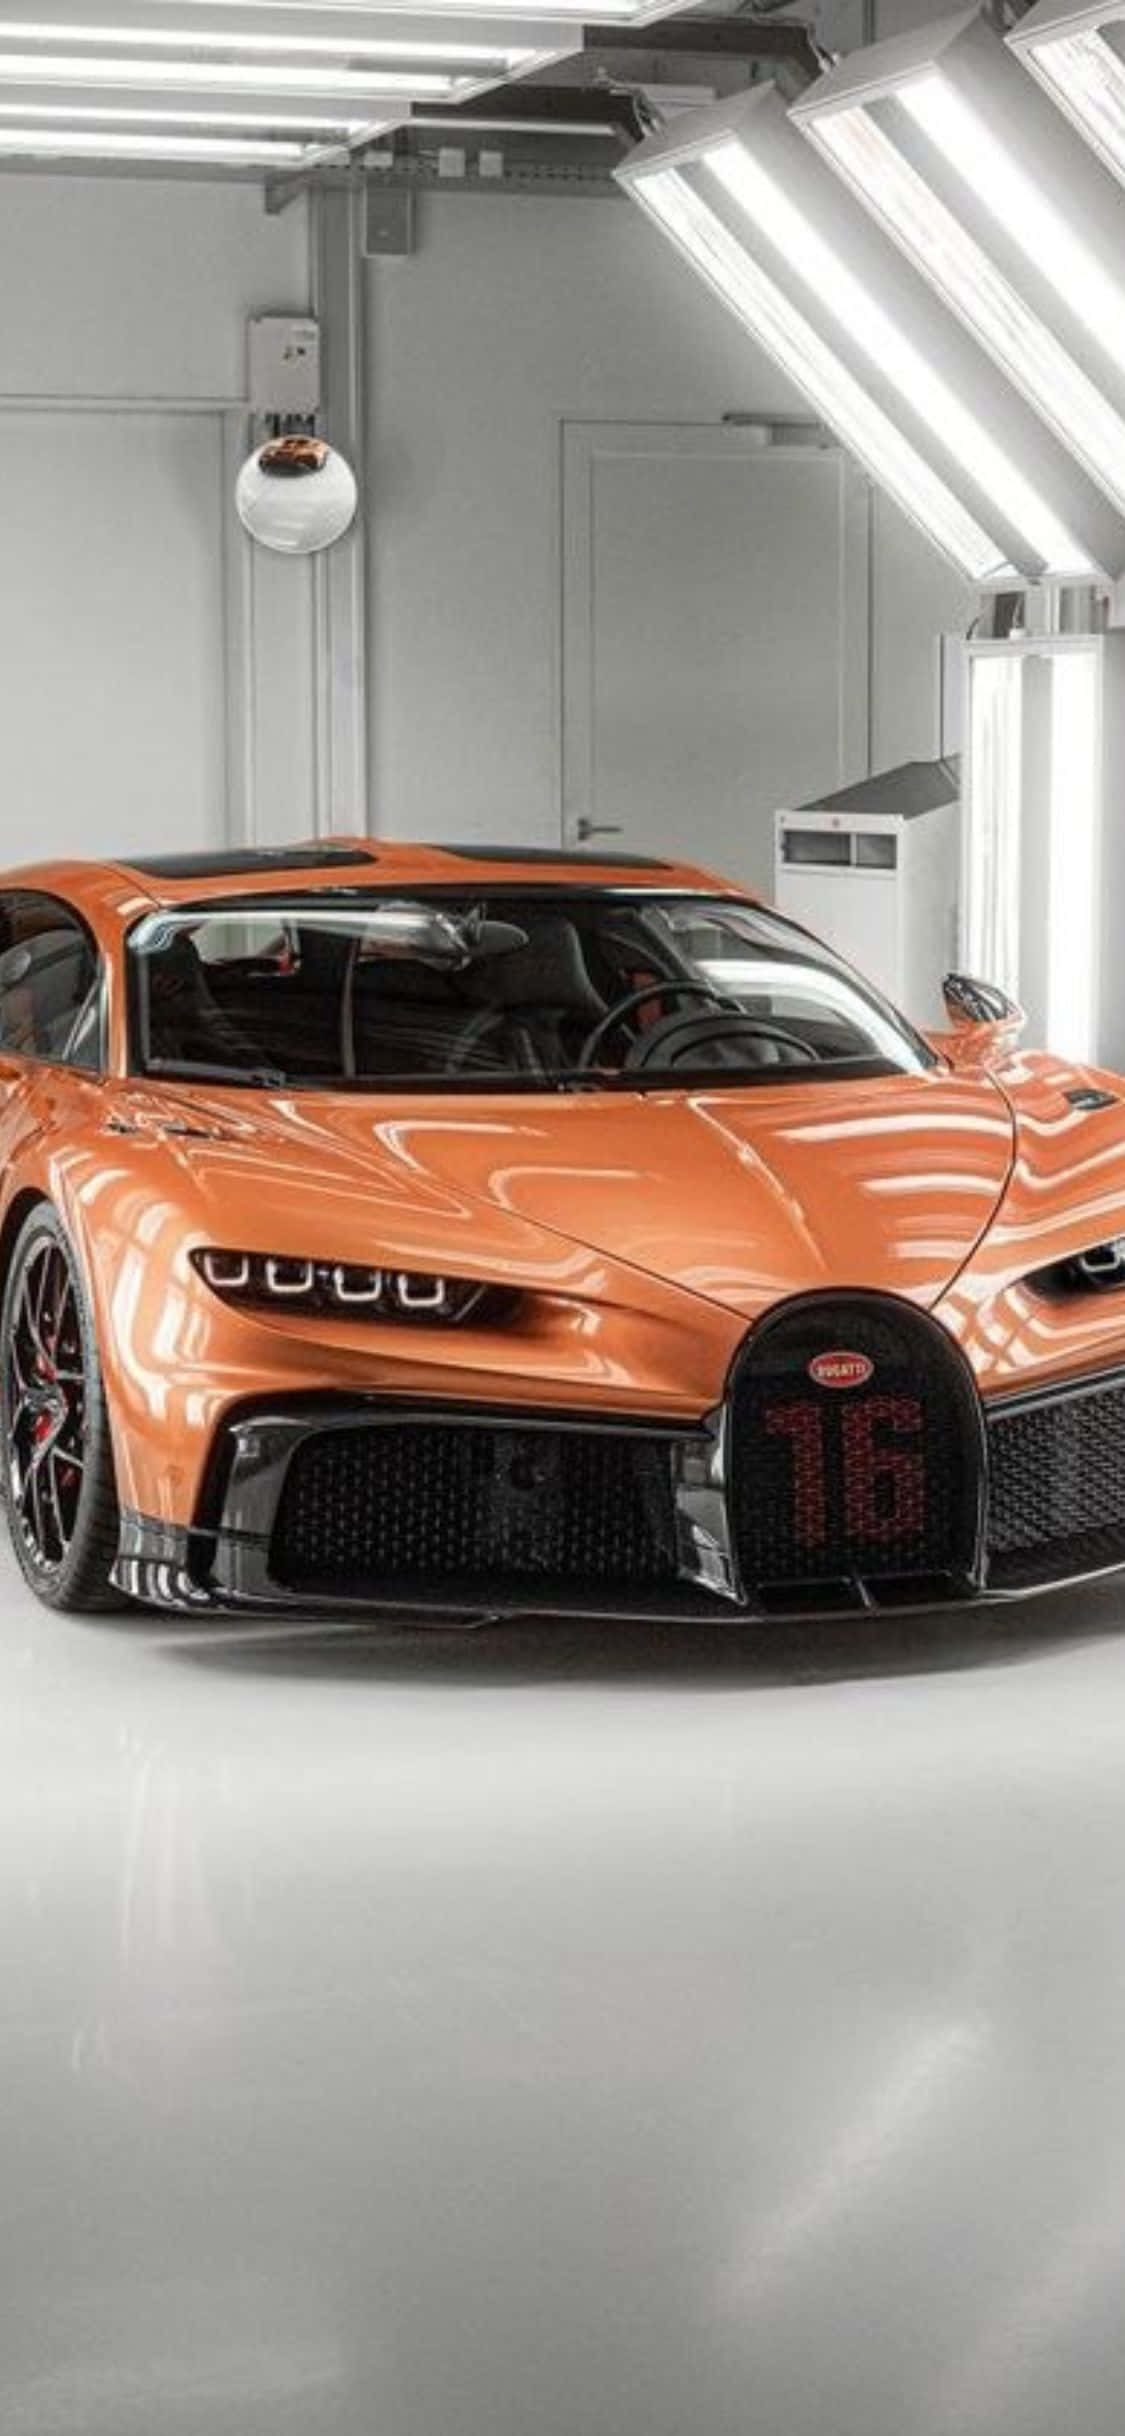 Harness the power and speed of the Iphone Xs with a Bugatti style.